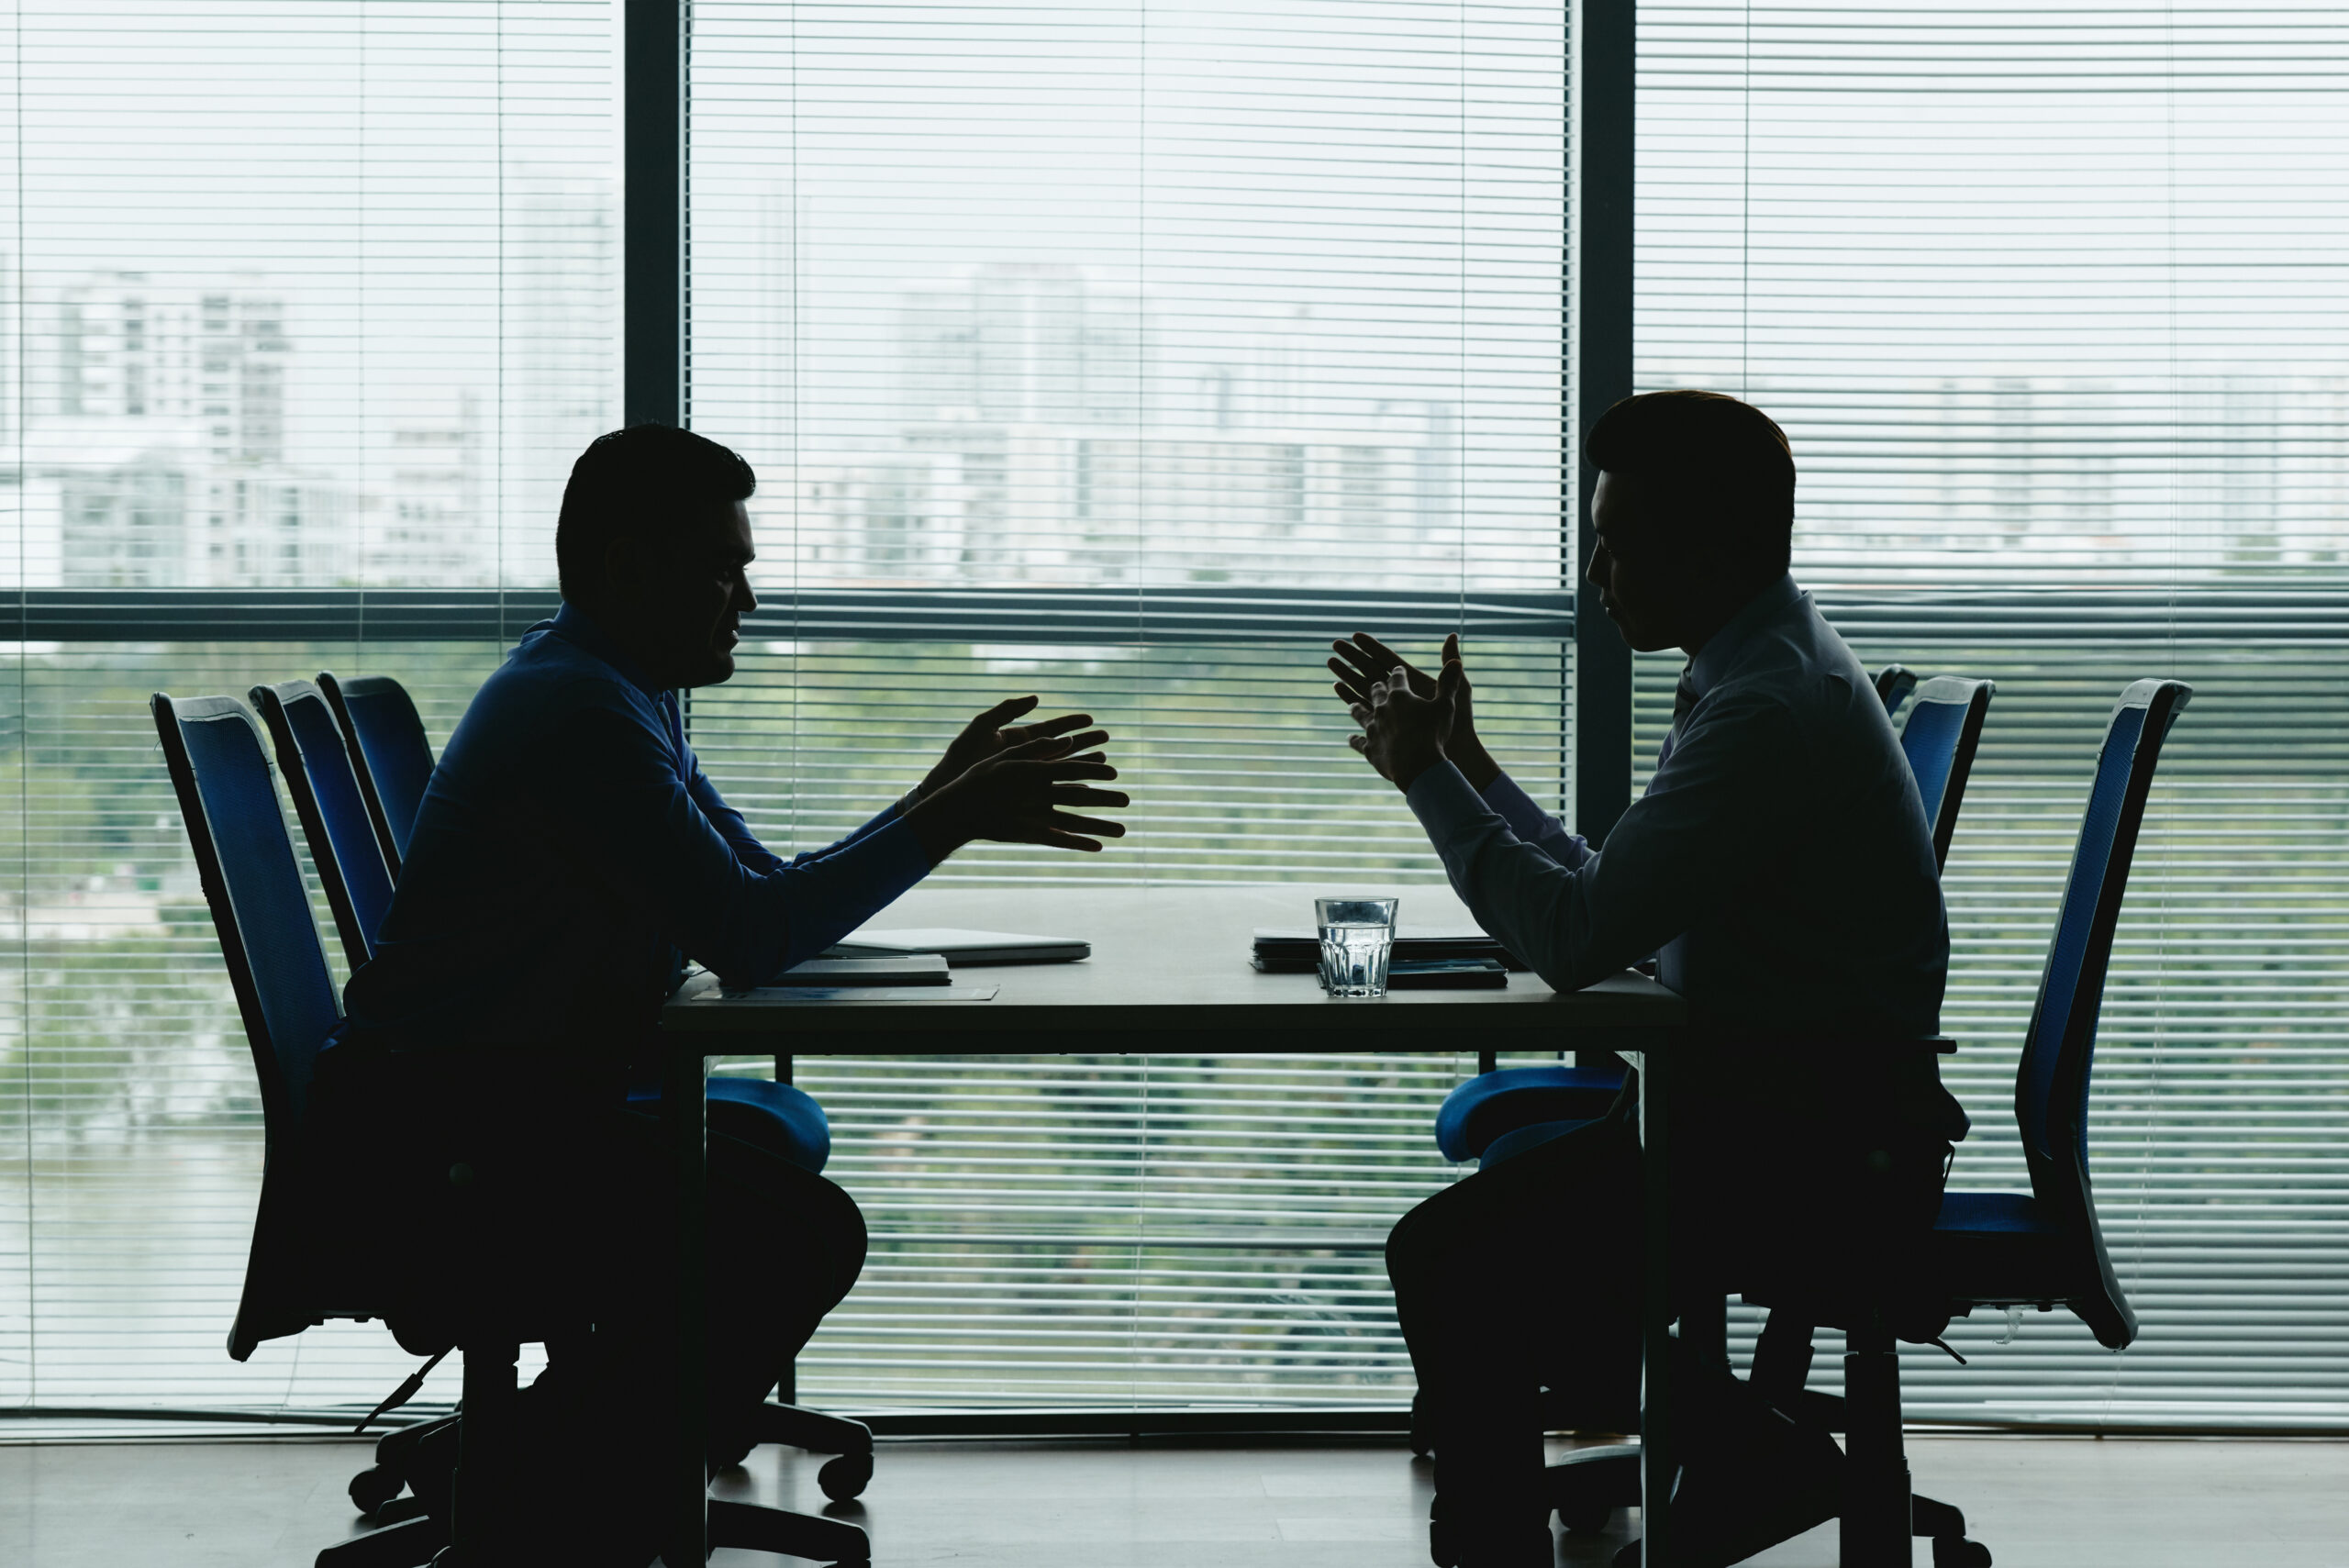 silhouettes-of-two-businessmen-sitting-at-a-table-in-front-of-window-with-view-of-office-park